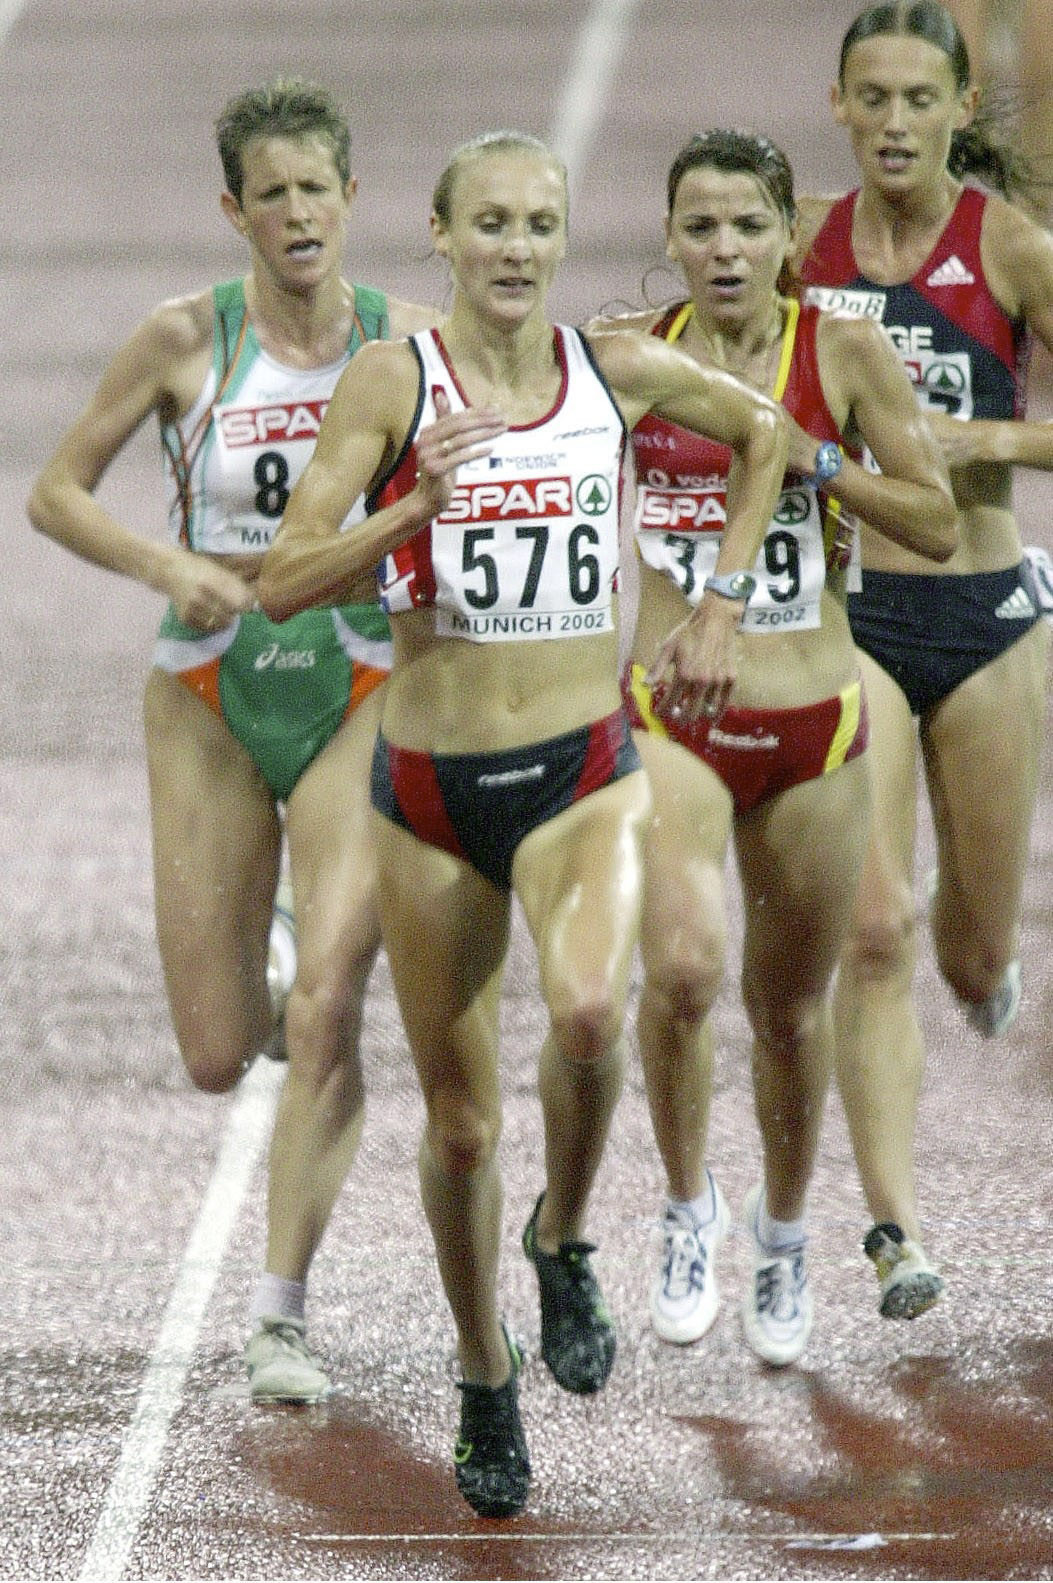 The European Athletics Championships are set to return - within the new multi-format - to Munich, where Britain's Paula Radcliffe won a monumental, rainswept 10,000m victory in 2002 ©Getty Images